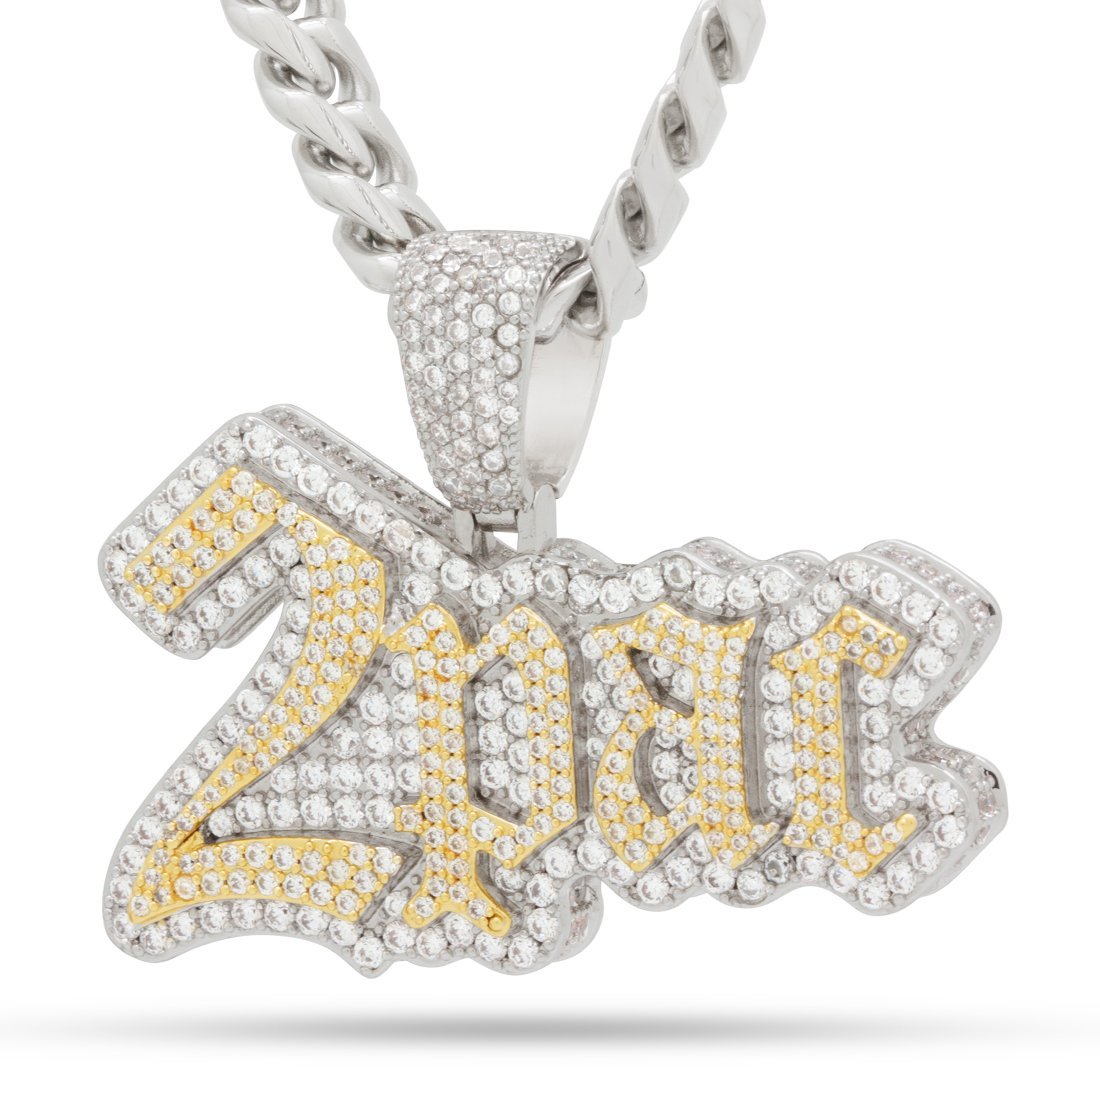 Drakesboutique - King Ice Jewelry